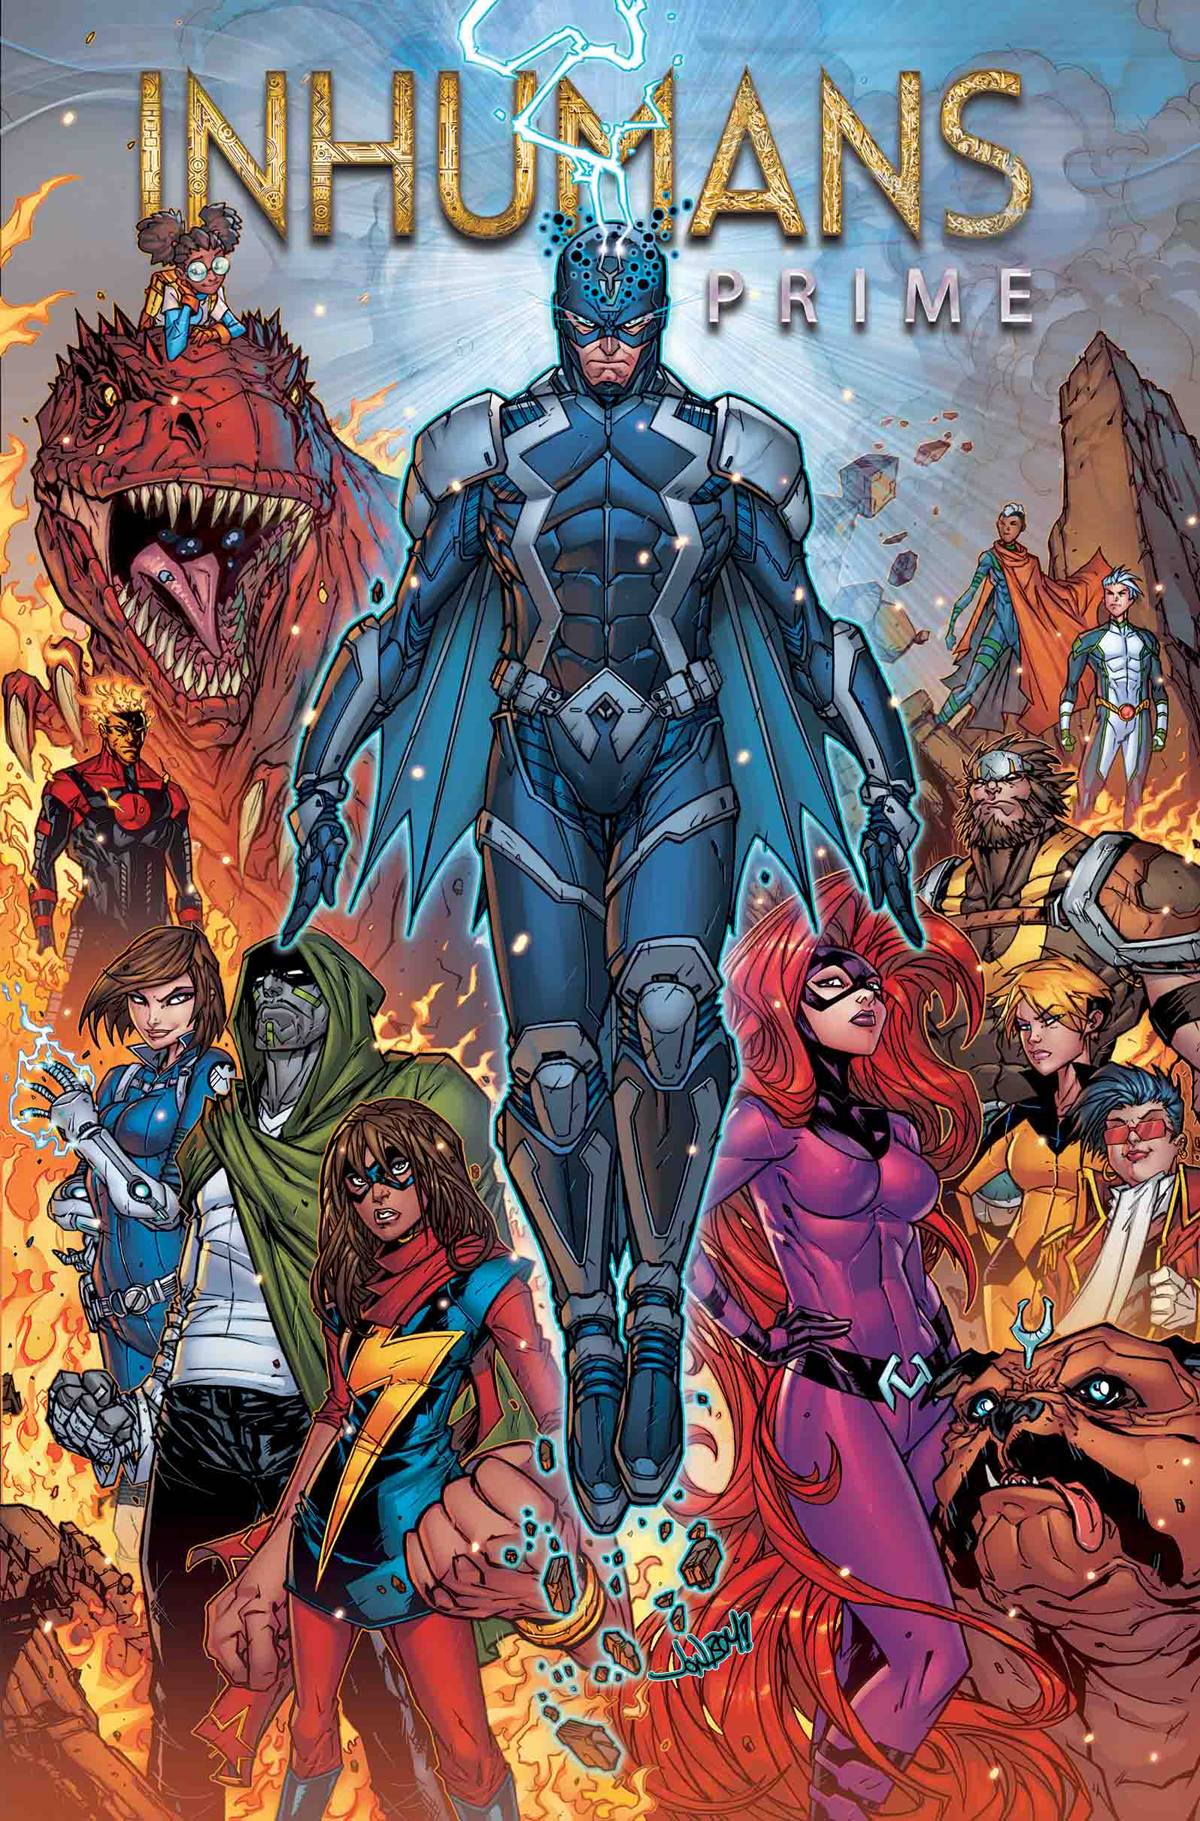 INHUMANS PRIME #1 BY MEYERS POSTER